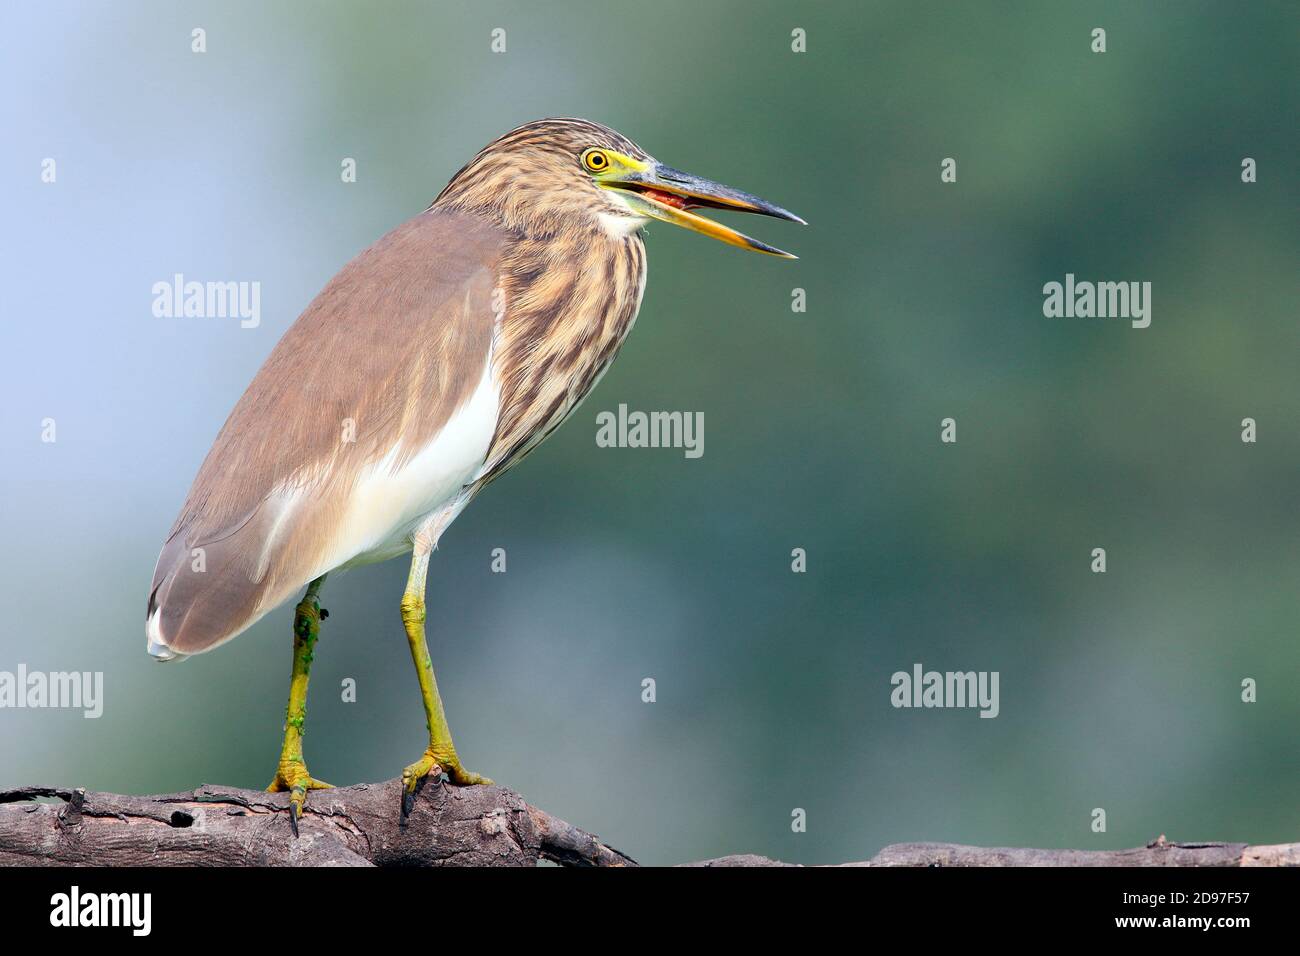 Indian Pond Heron (Ardeola grayii) adult perched on a branch swallowing prey, Northwest India Stock Photo